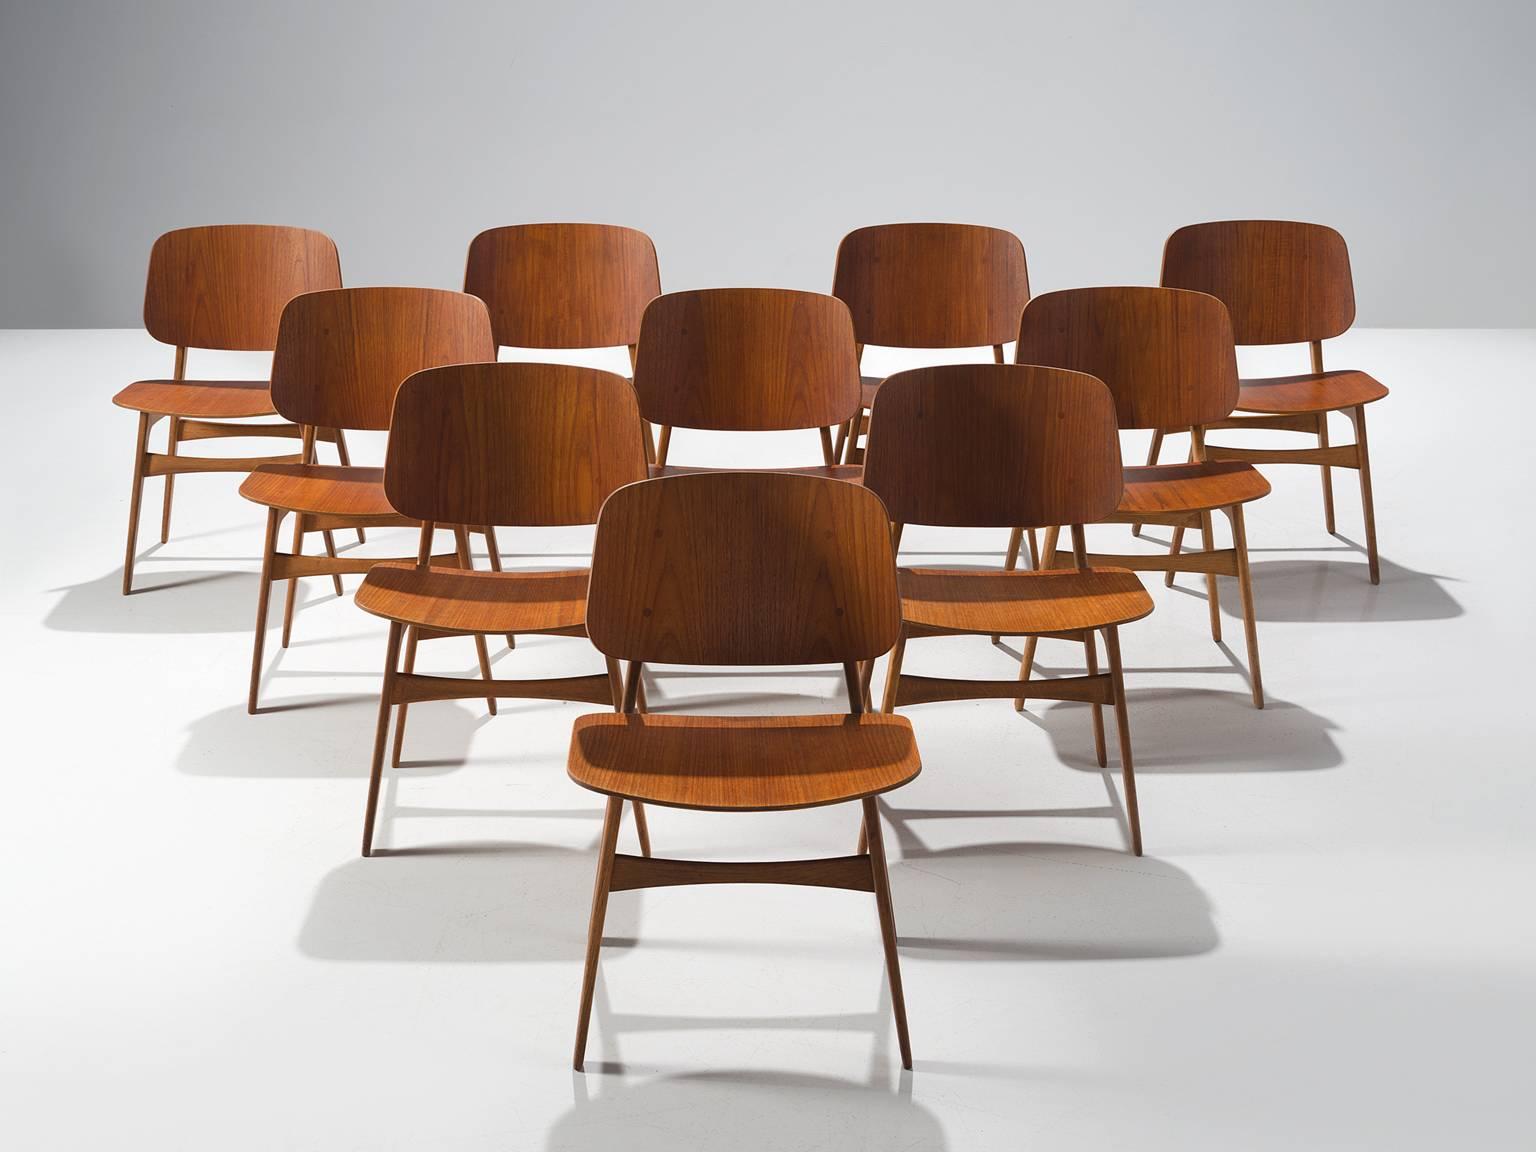 Børge Mogensen for Soborg, Shell chairs, teak, Denmark, circa 1950. 

This set of chairs is derived from the Shell Chair that Mogensen designed in 1949 for the cabinetmakers guild. The shell chair distinguishes itself by the use of a plywood